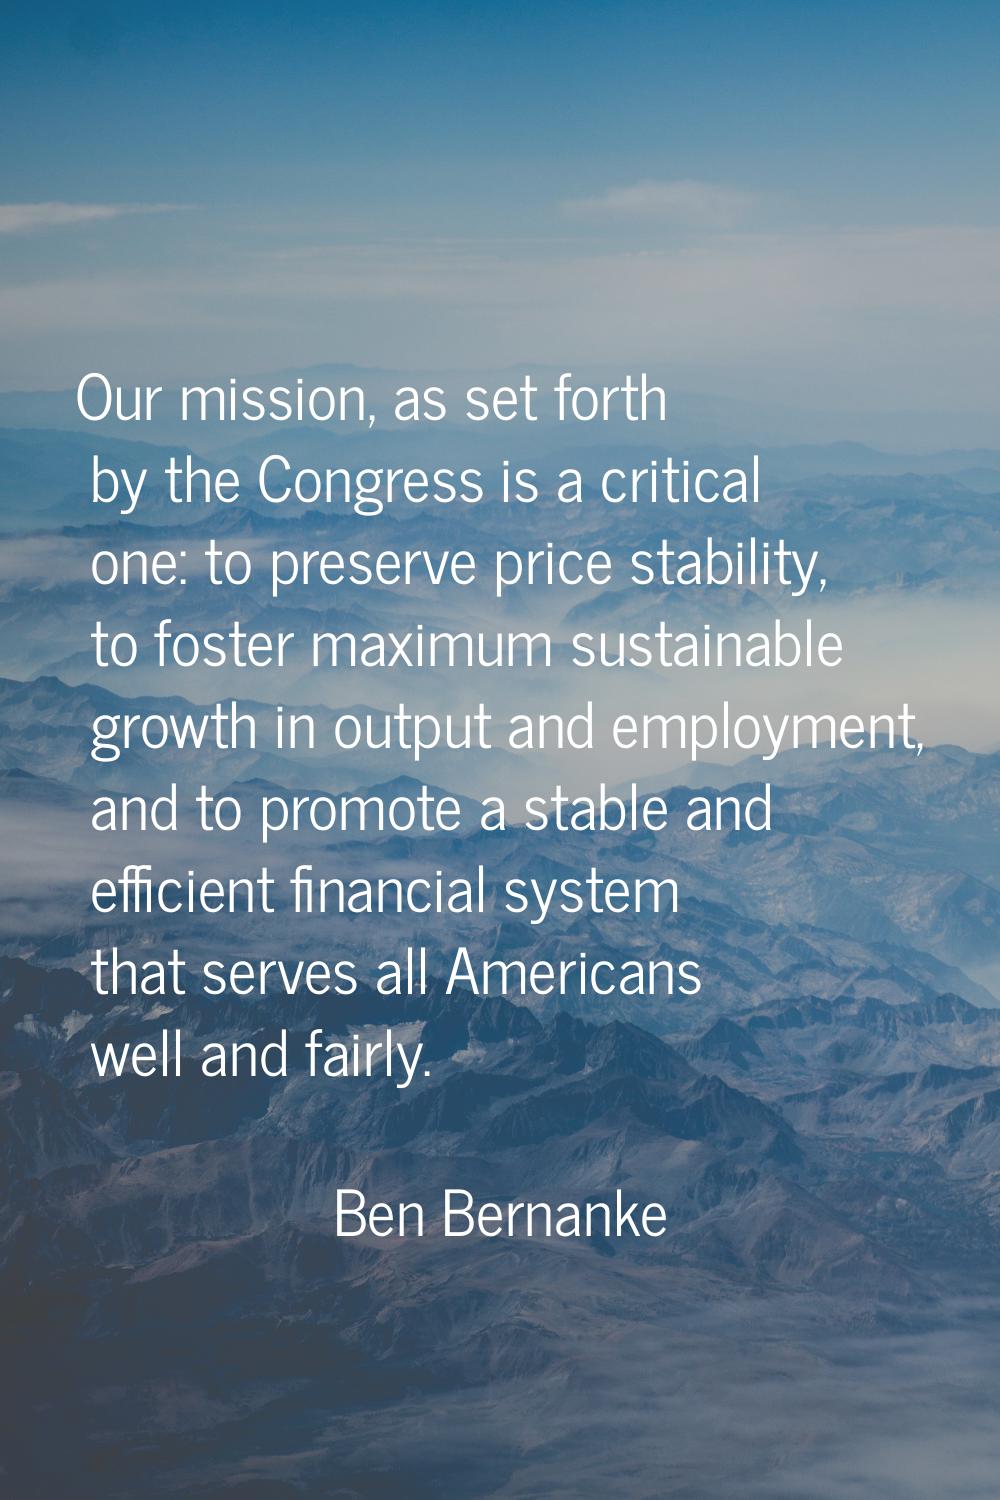 Our mission, as set forth by the Congress is a critical one: to preserve price stability, to foster